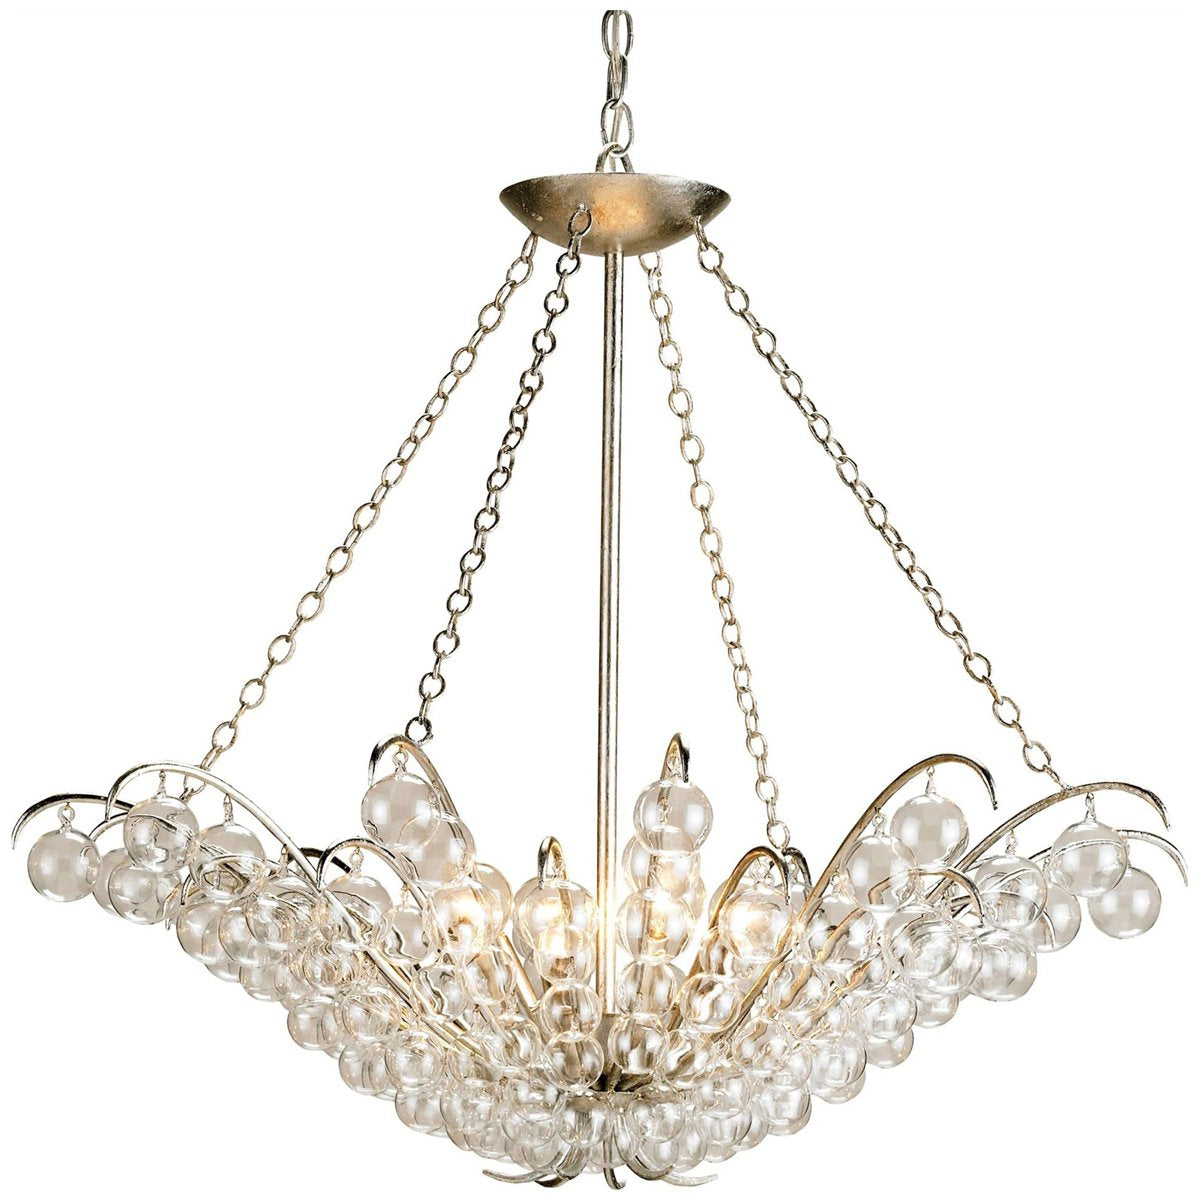 Currey and Company Quantum Chandelier